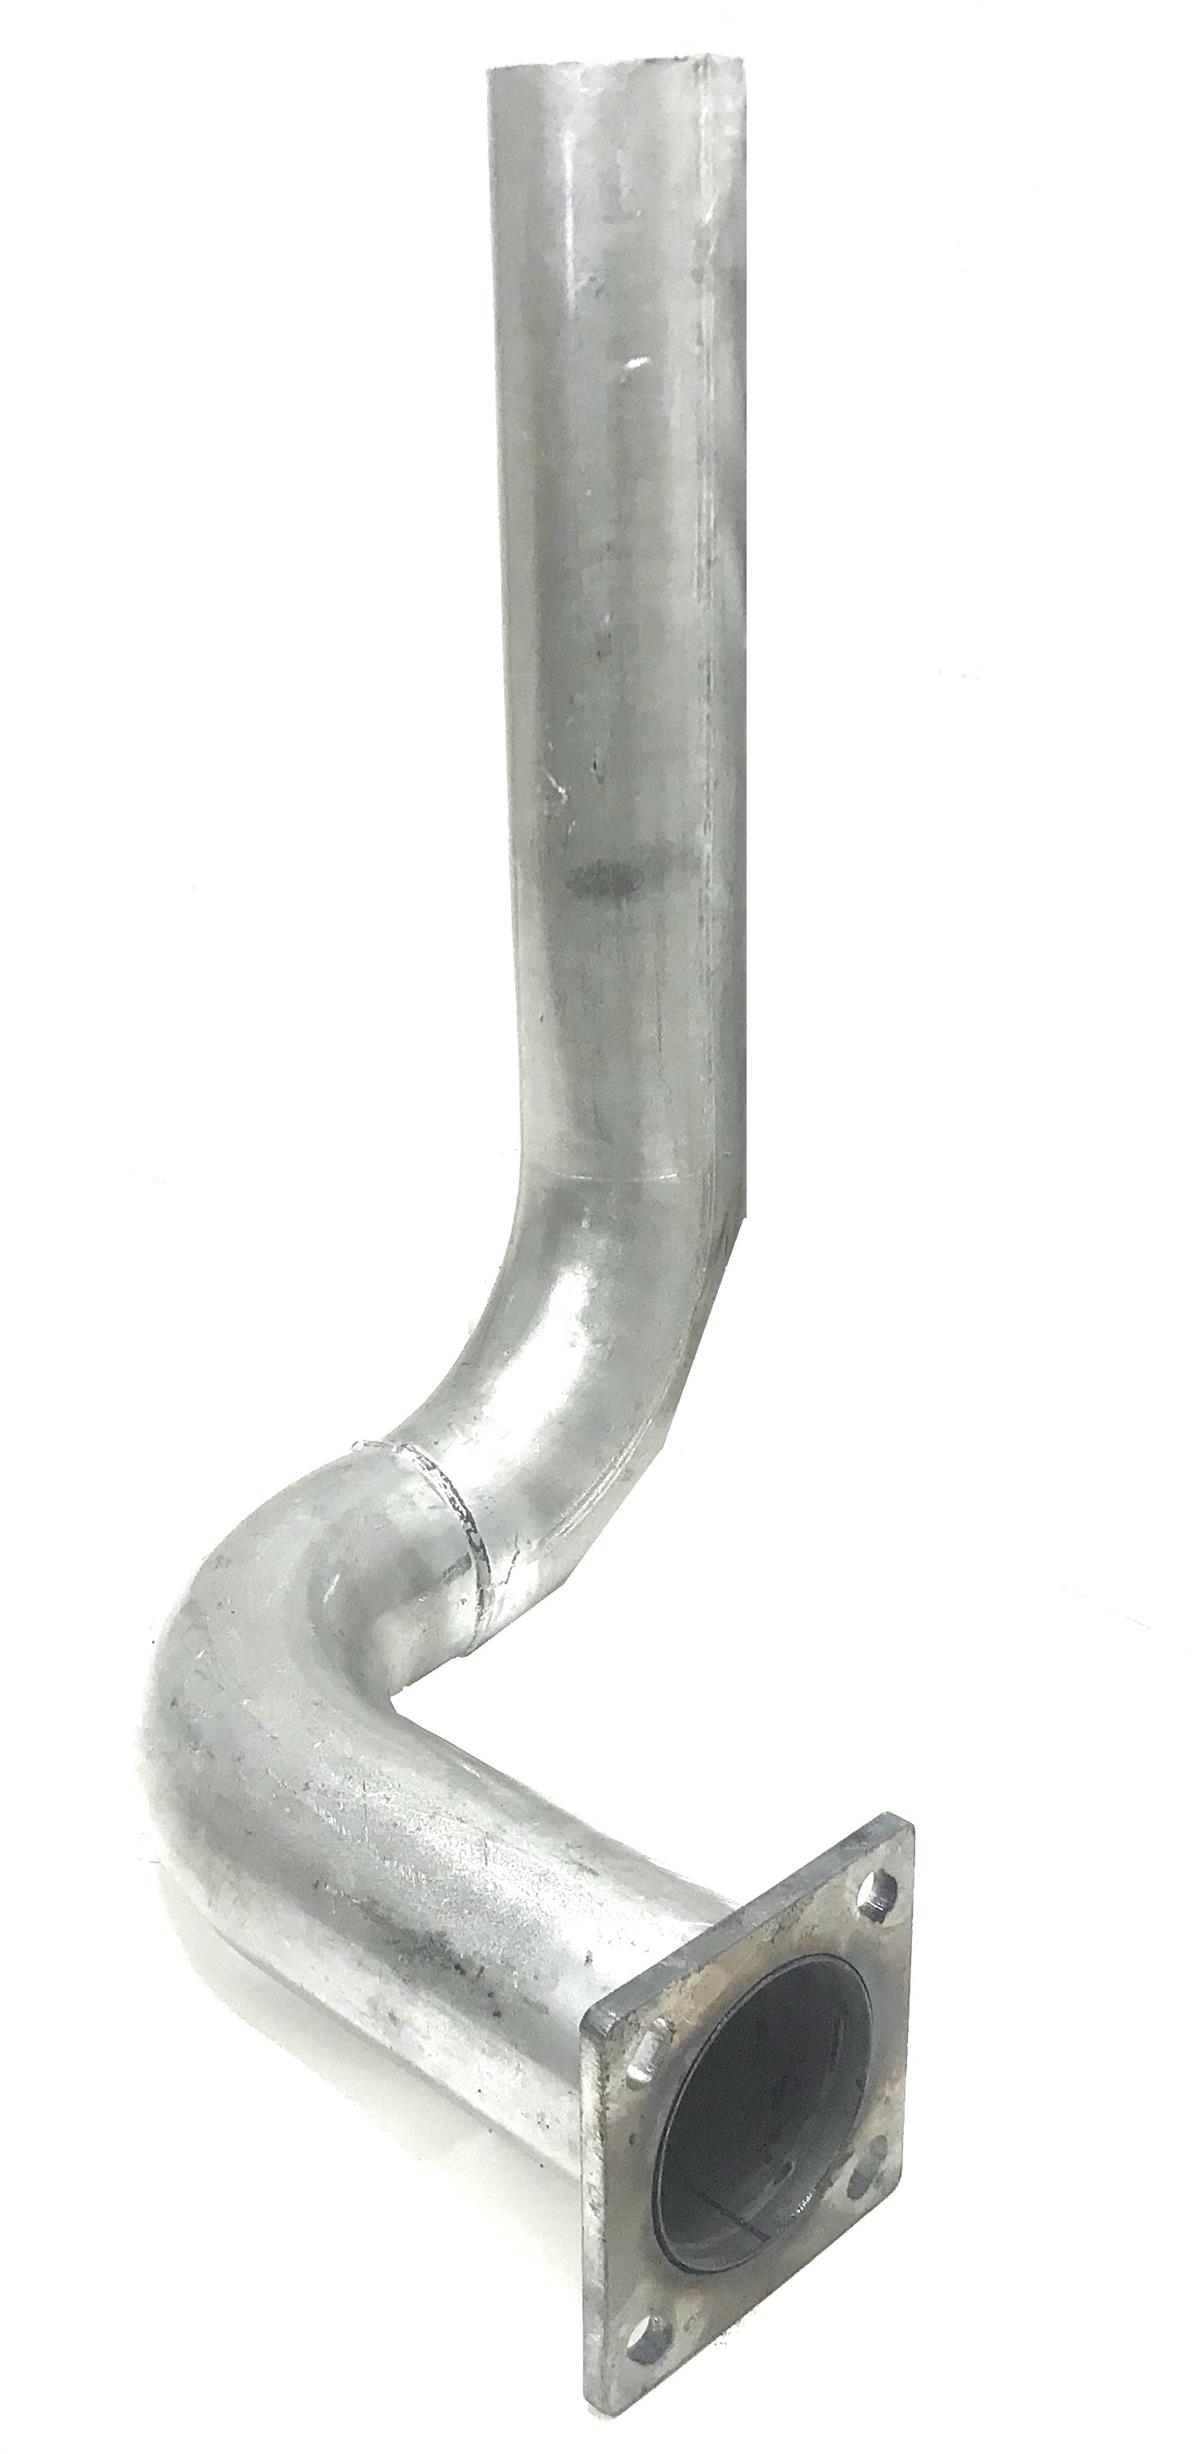 5T-598 | 5T-598  Exhaust Pipe Muffler to Stack M809 (NOS) (443).jpg